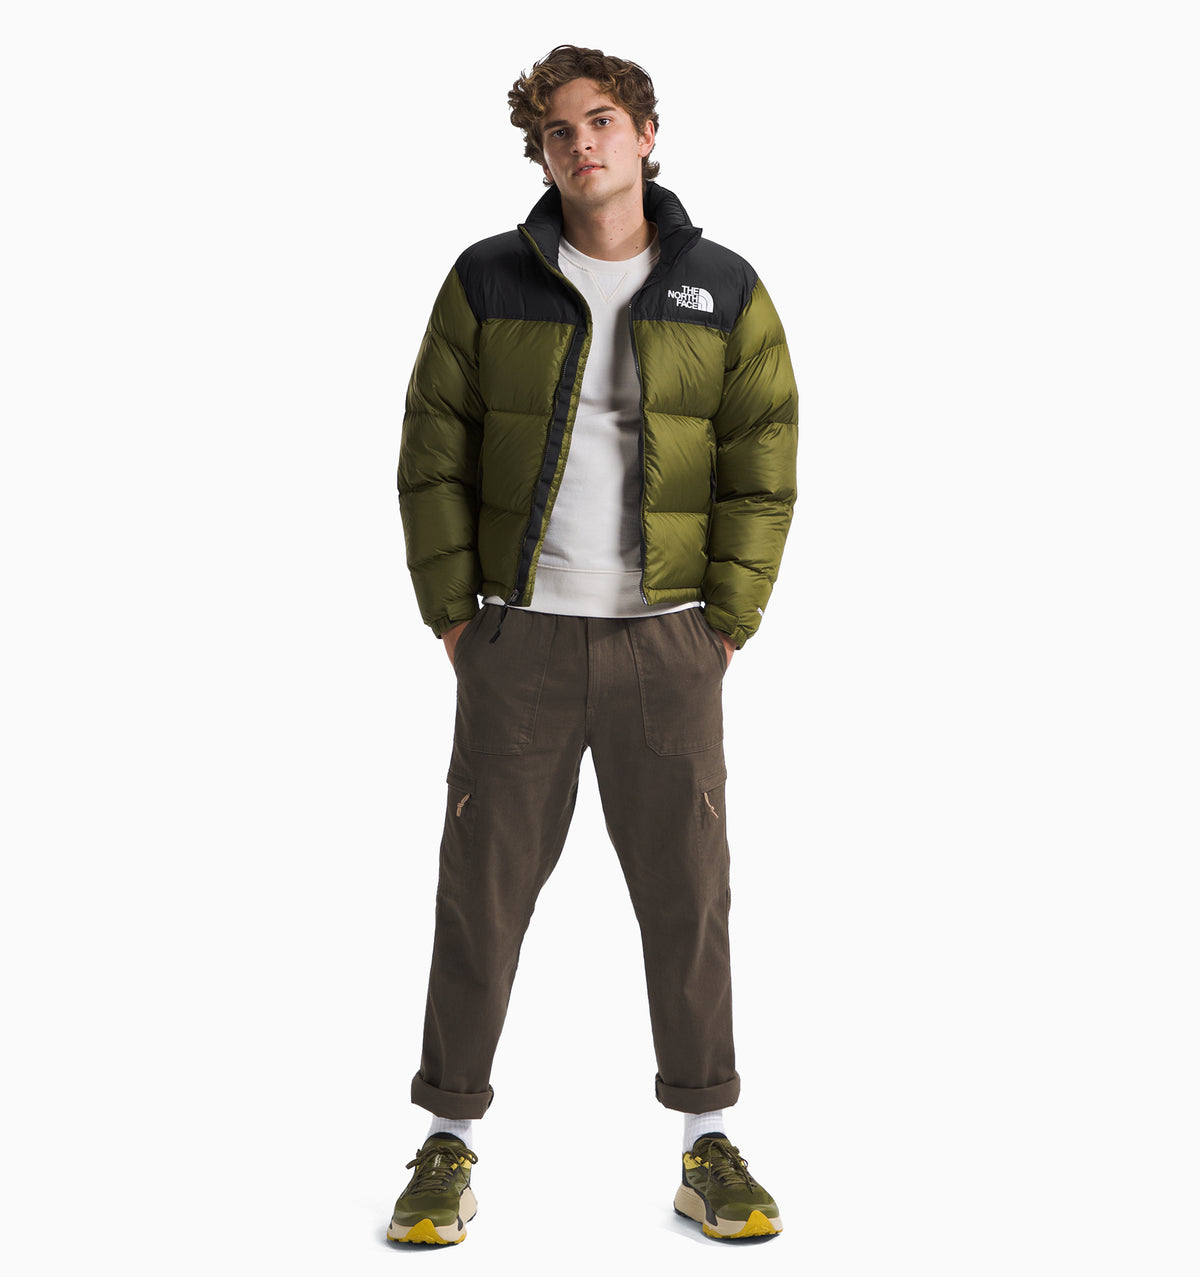 The North Face Men's 1996 Retro Nuptse Jacket - Forest Olive